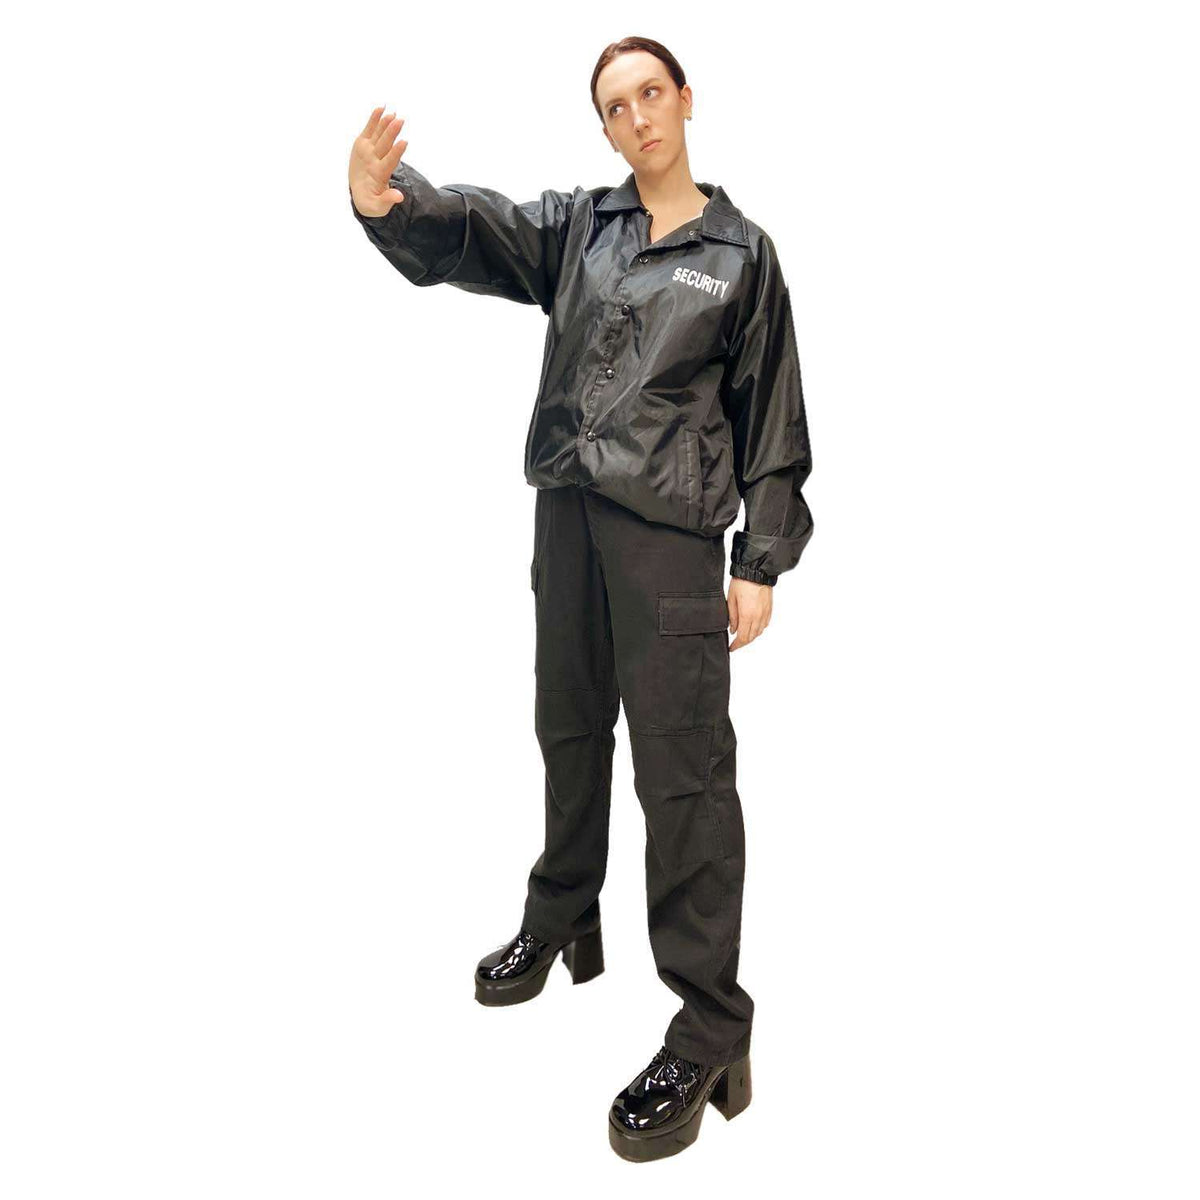 Security Officer Jacket Costume